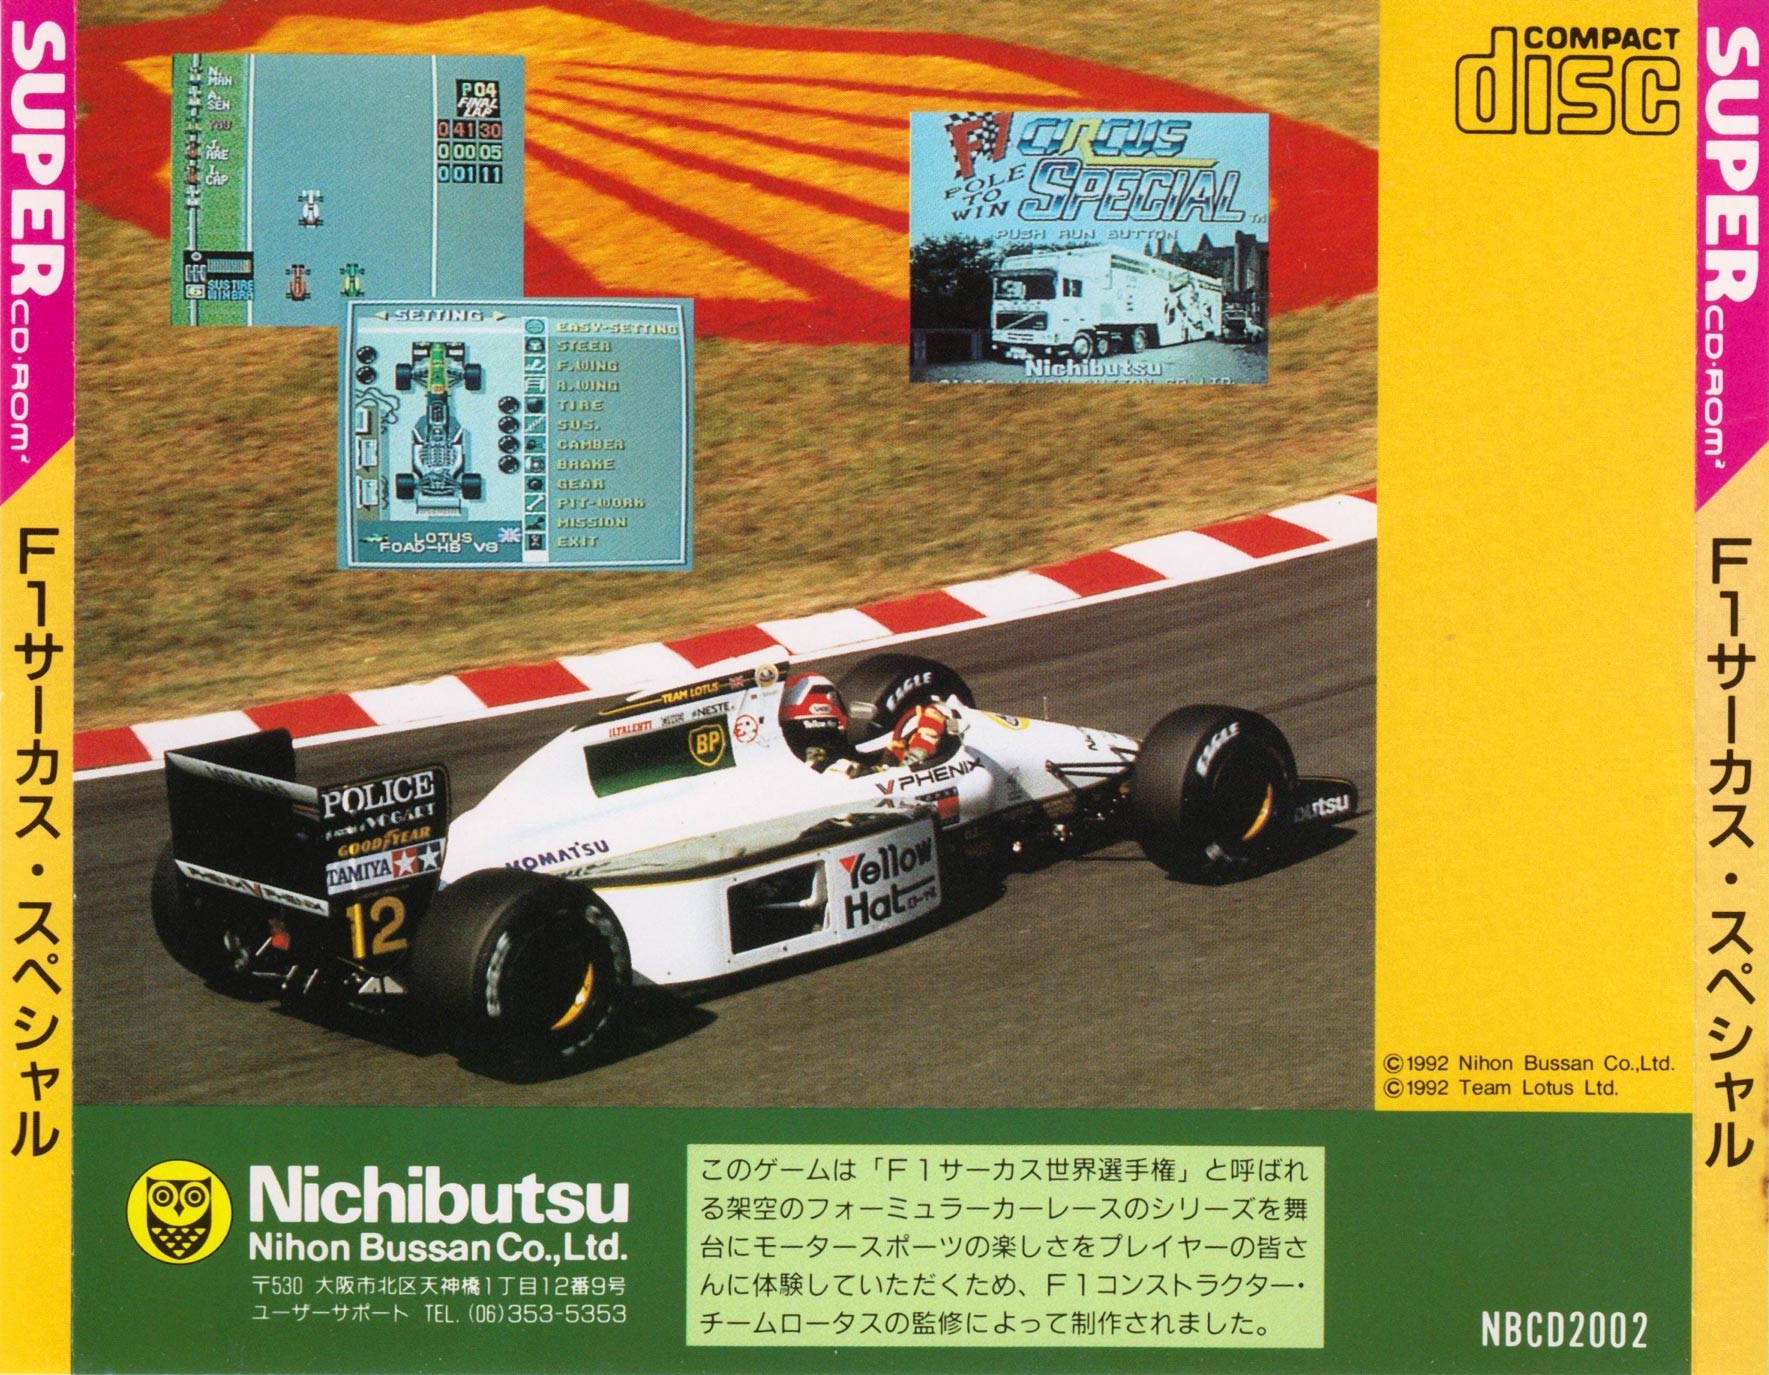 F1 Circus Special - The PC Engine Software Bible